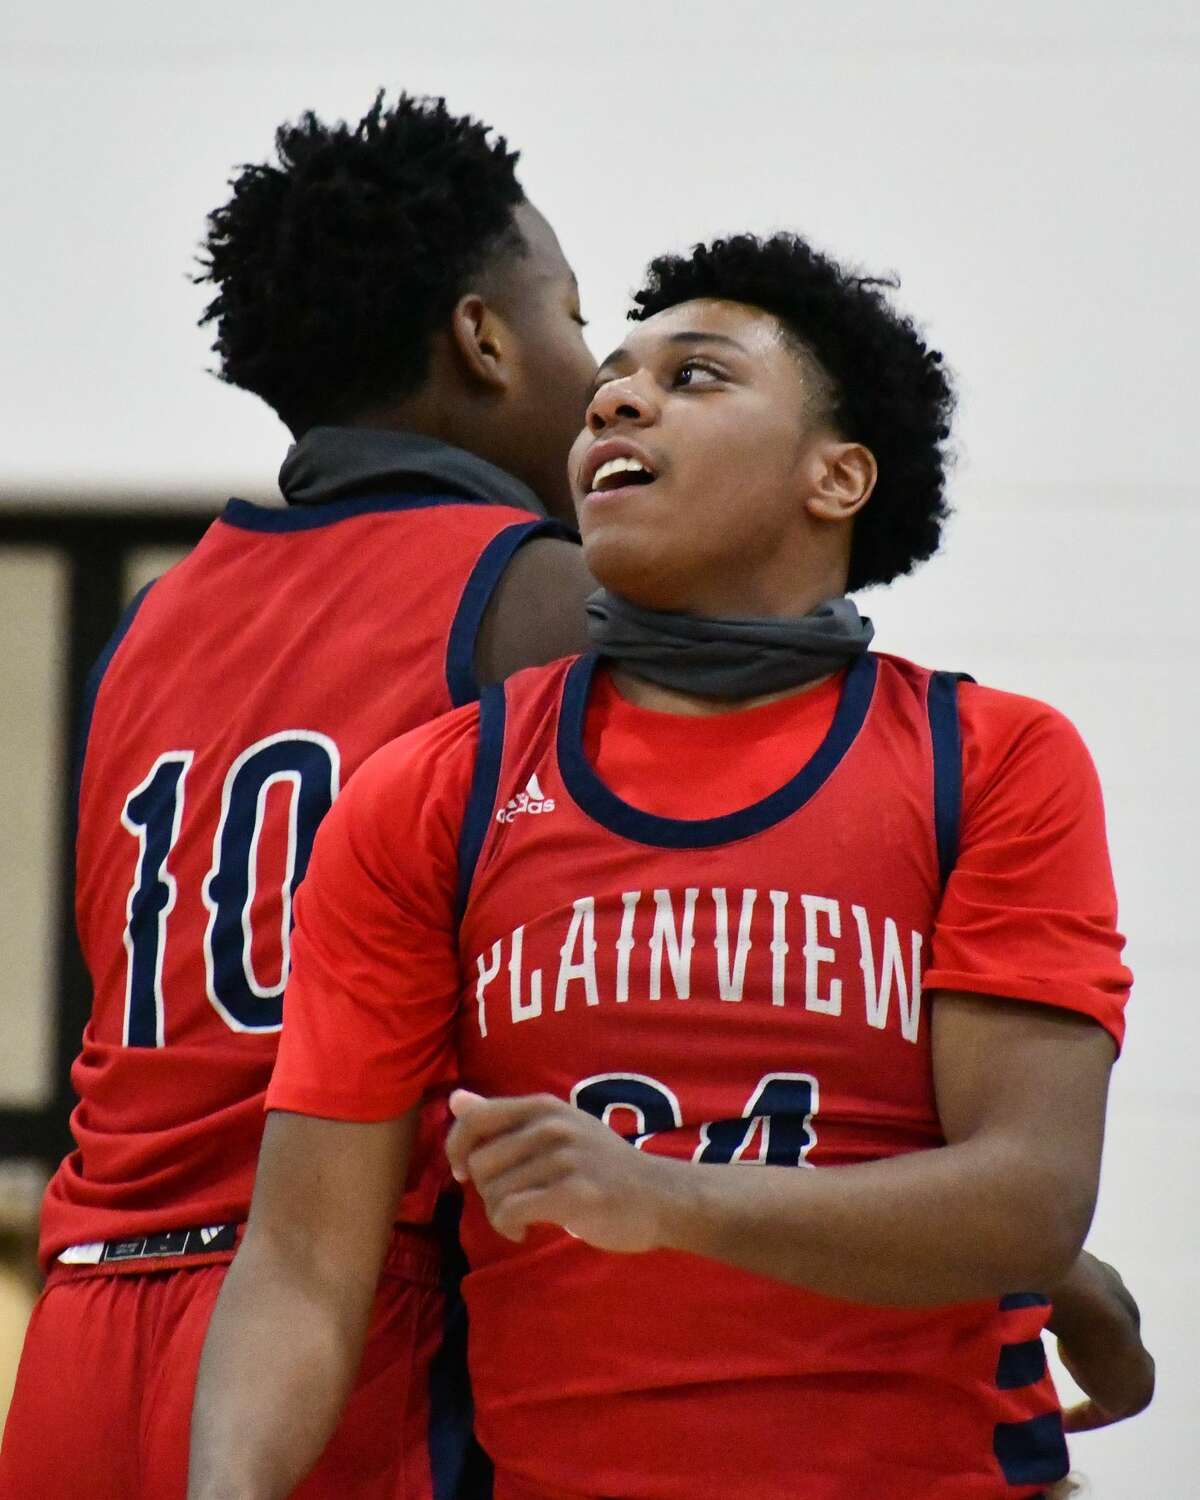 The Plainview boys basketball team defeated Lubbock Monterey  65-57  on Thursday night at Abernathy in a Class 5A bi-district playoff game.